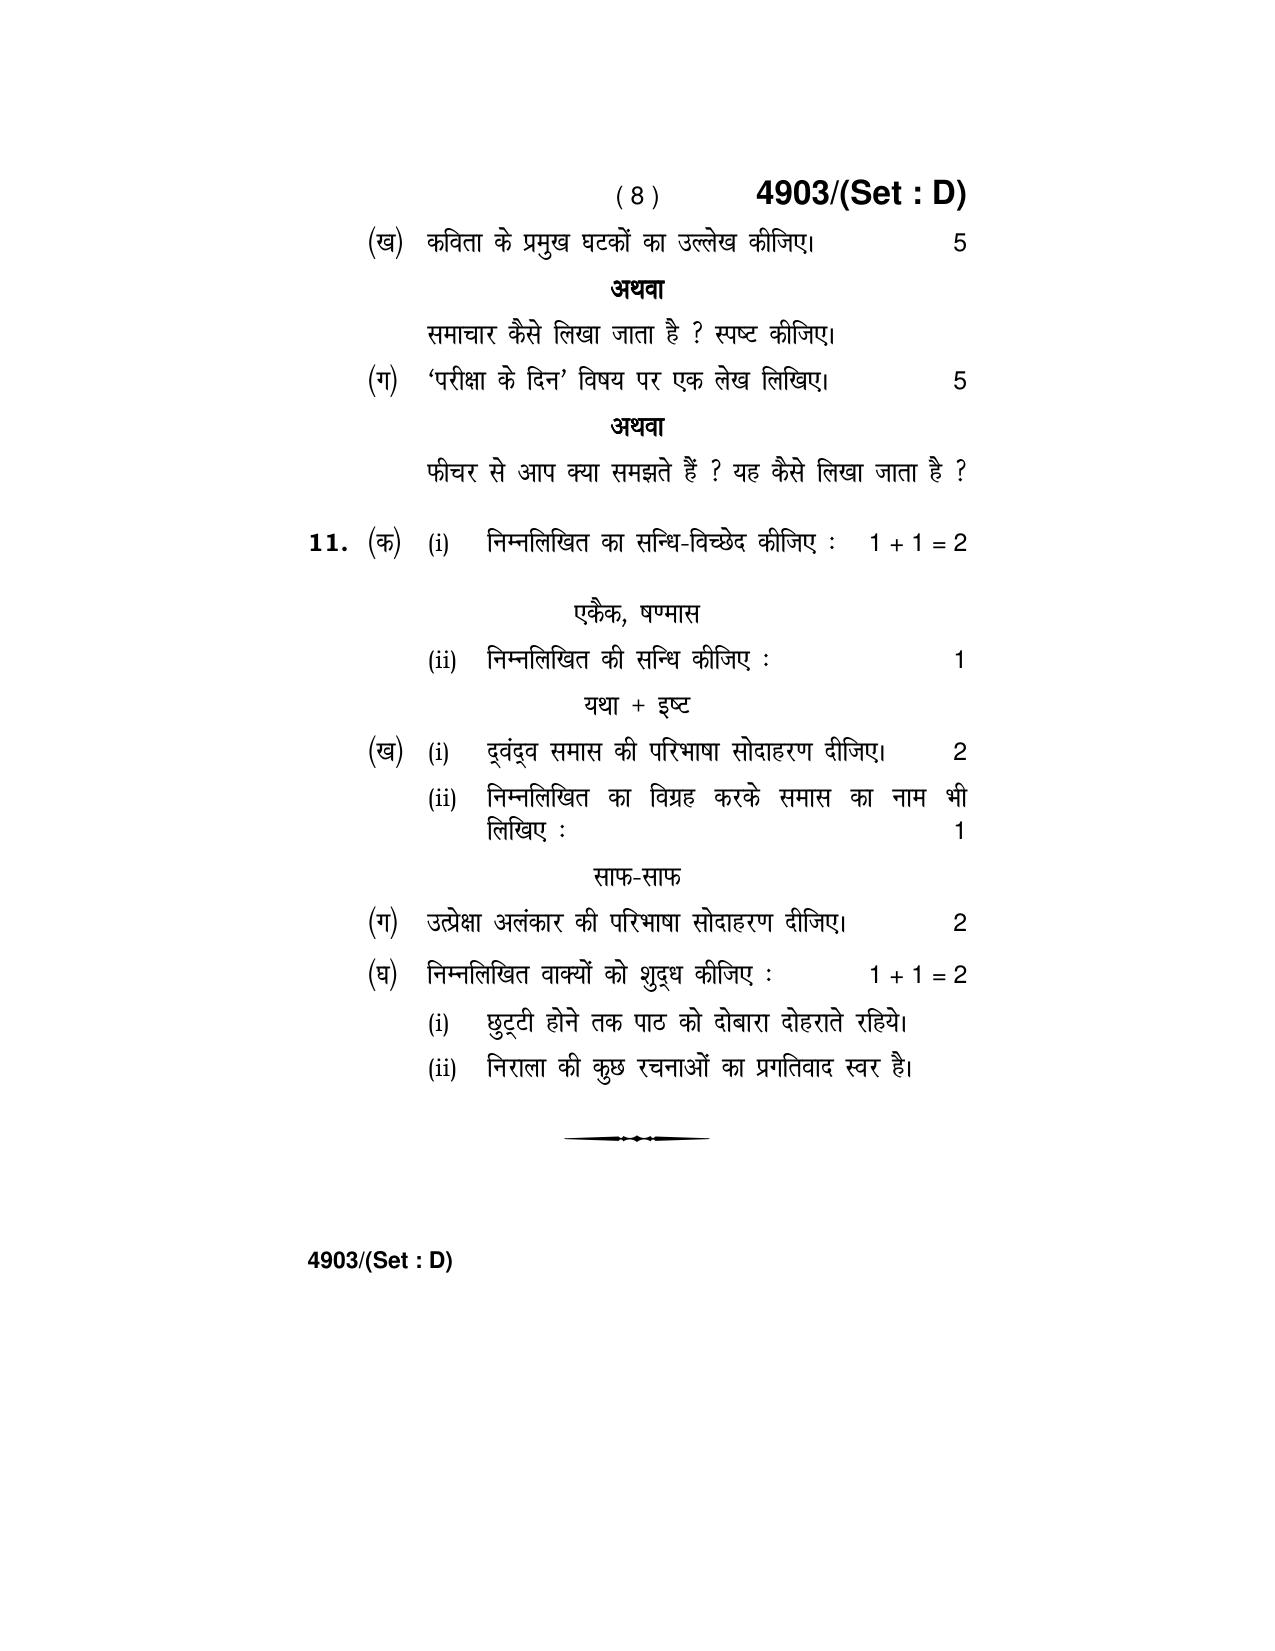 Haryana Board HBSE Class 12 Hindi Core 2020 Question Paper - Page 32